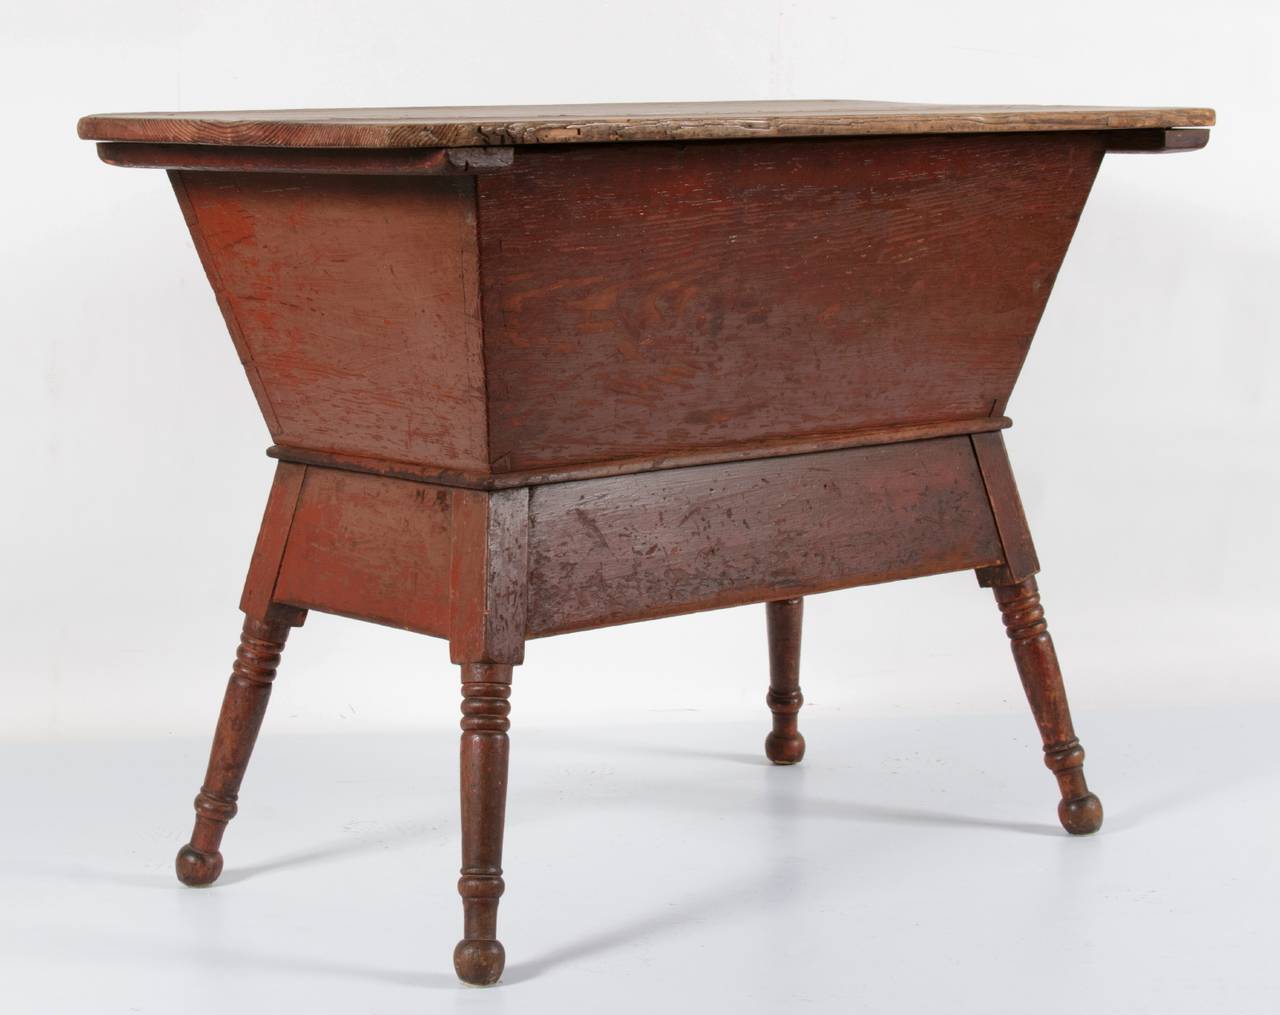 Southern dough table on turned feet in salmon red paint, 1840-1860:

Dough table in an orange/salmon-red painted surface. Made of yellow pine, it's origin is probably Southern. The form is Pennsylvania in style, but the most likely states are